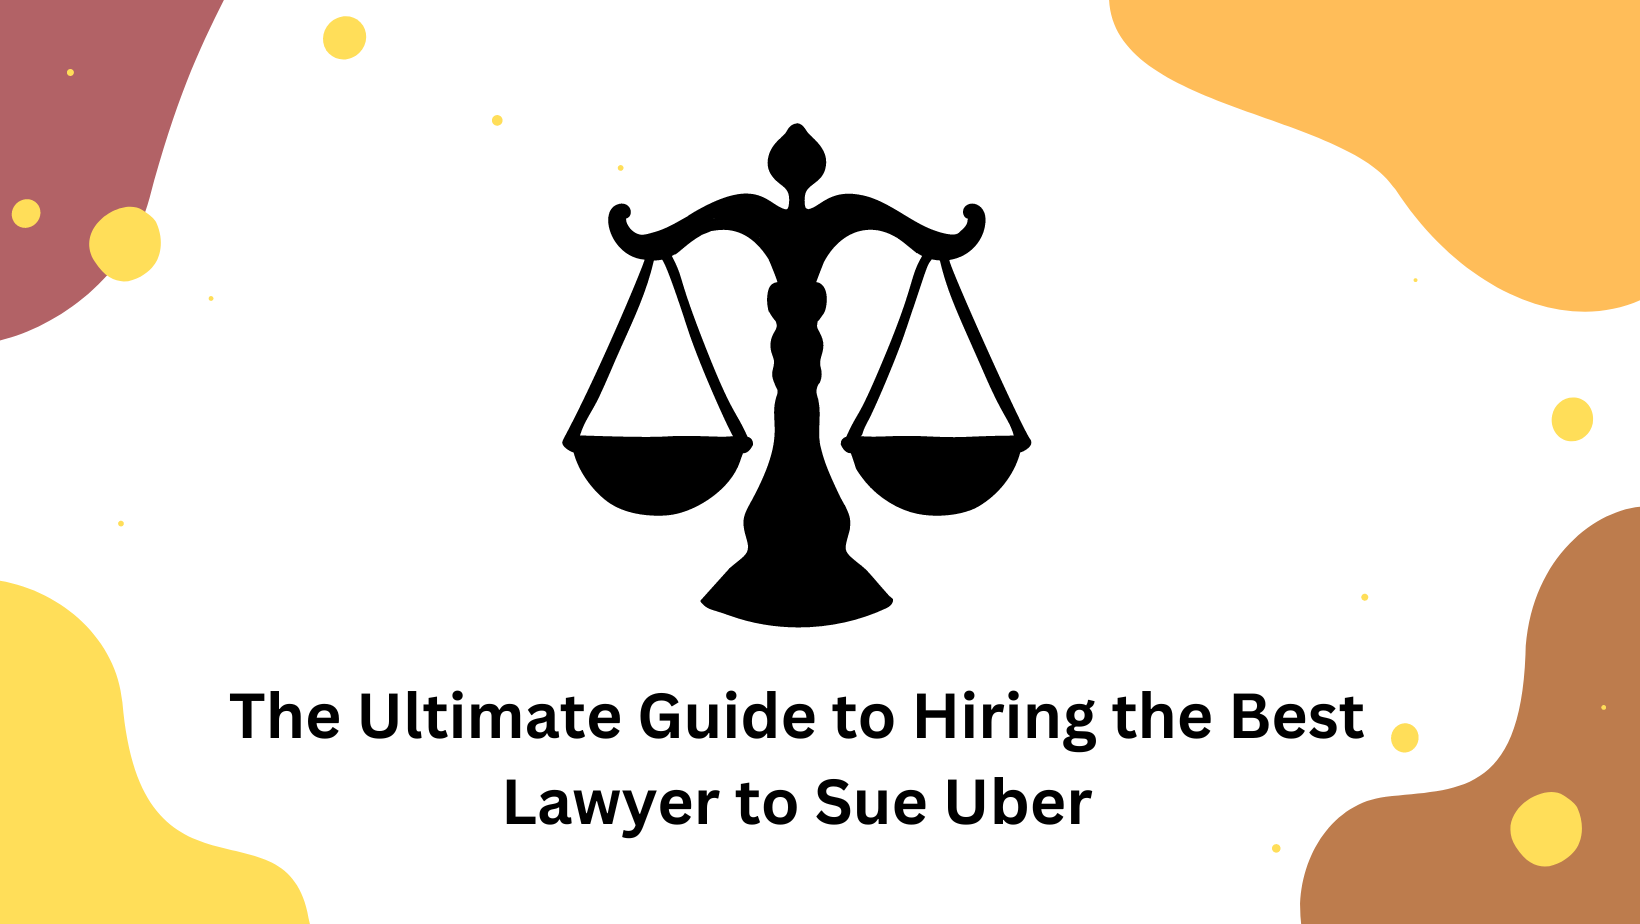 The Ultimate Guide to Hiring the Best Lawyer to Sue Uber